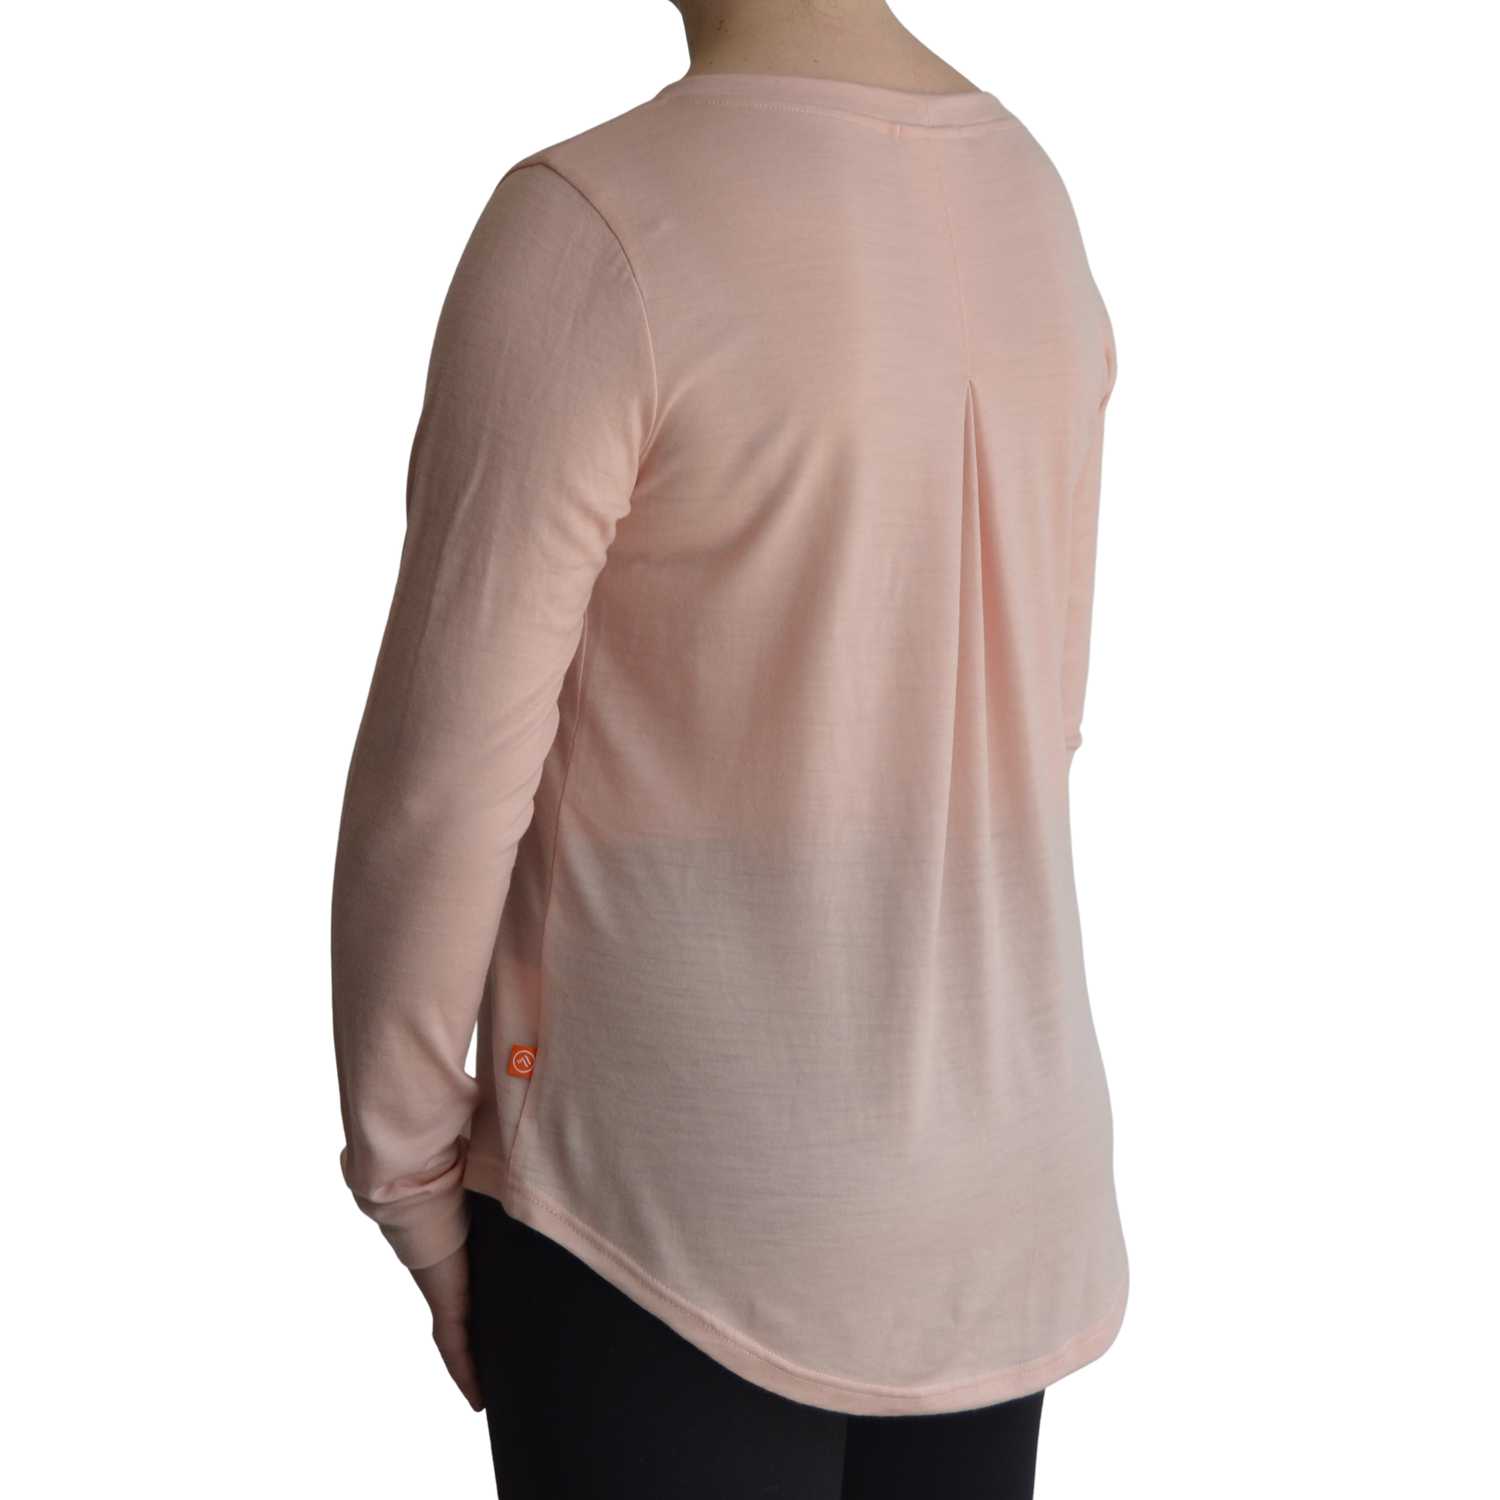 Links long sleeve merino top in petal light pink colour. The model is standing on a 45 degree angle facing the back showing a dropped back hemline and box pleat. 